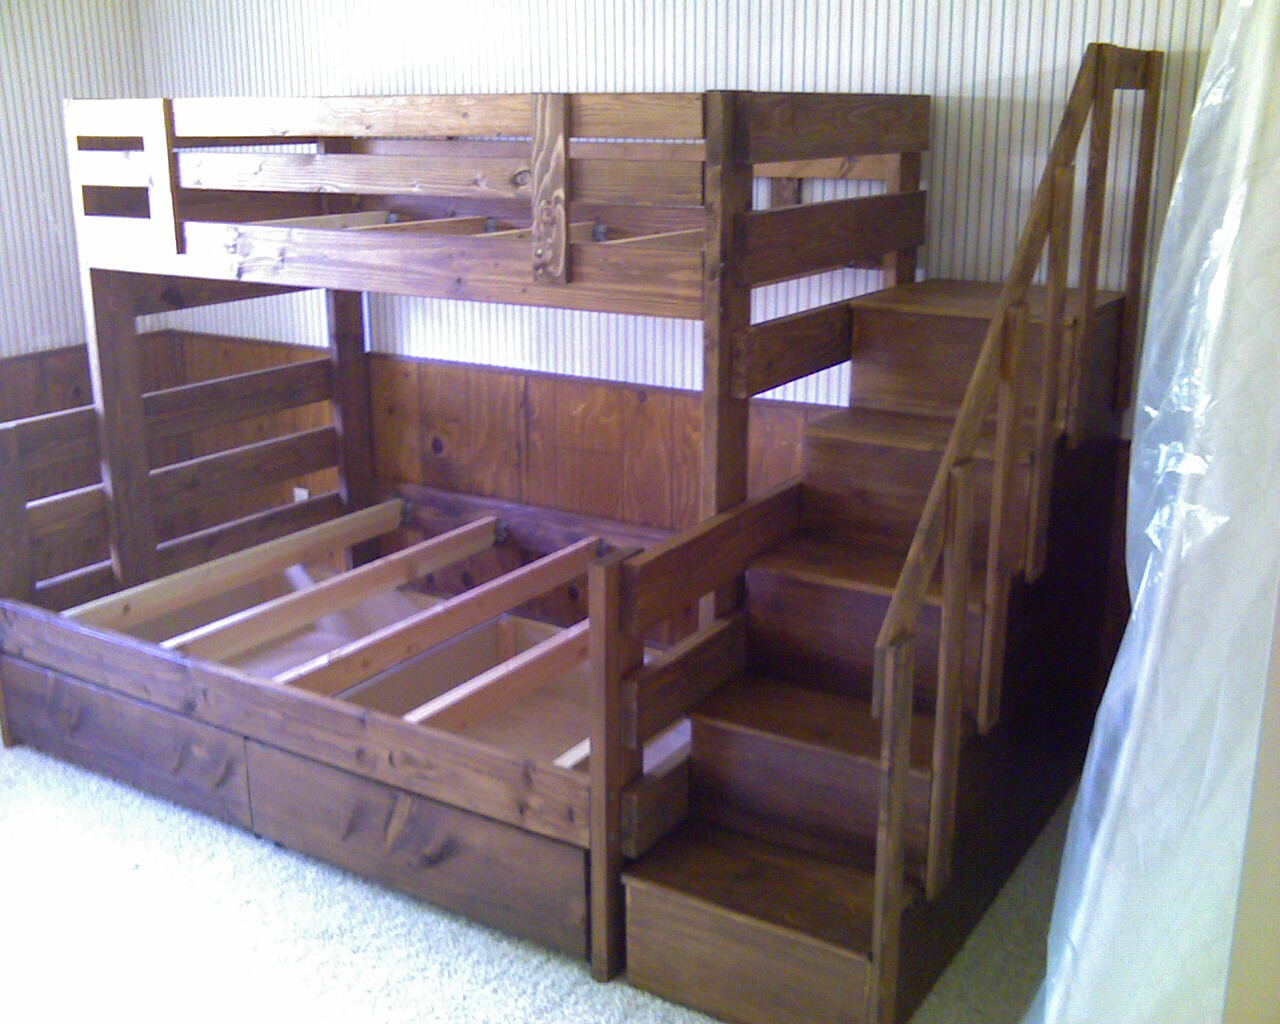 Todd S Custom Bunk Beds The Wood, Custom Bunk Beds With Stairs